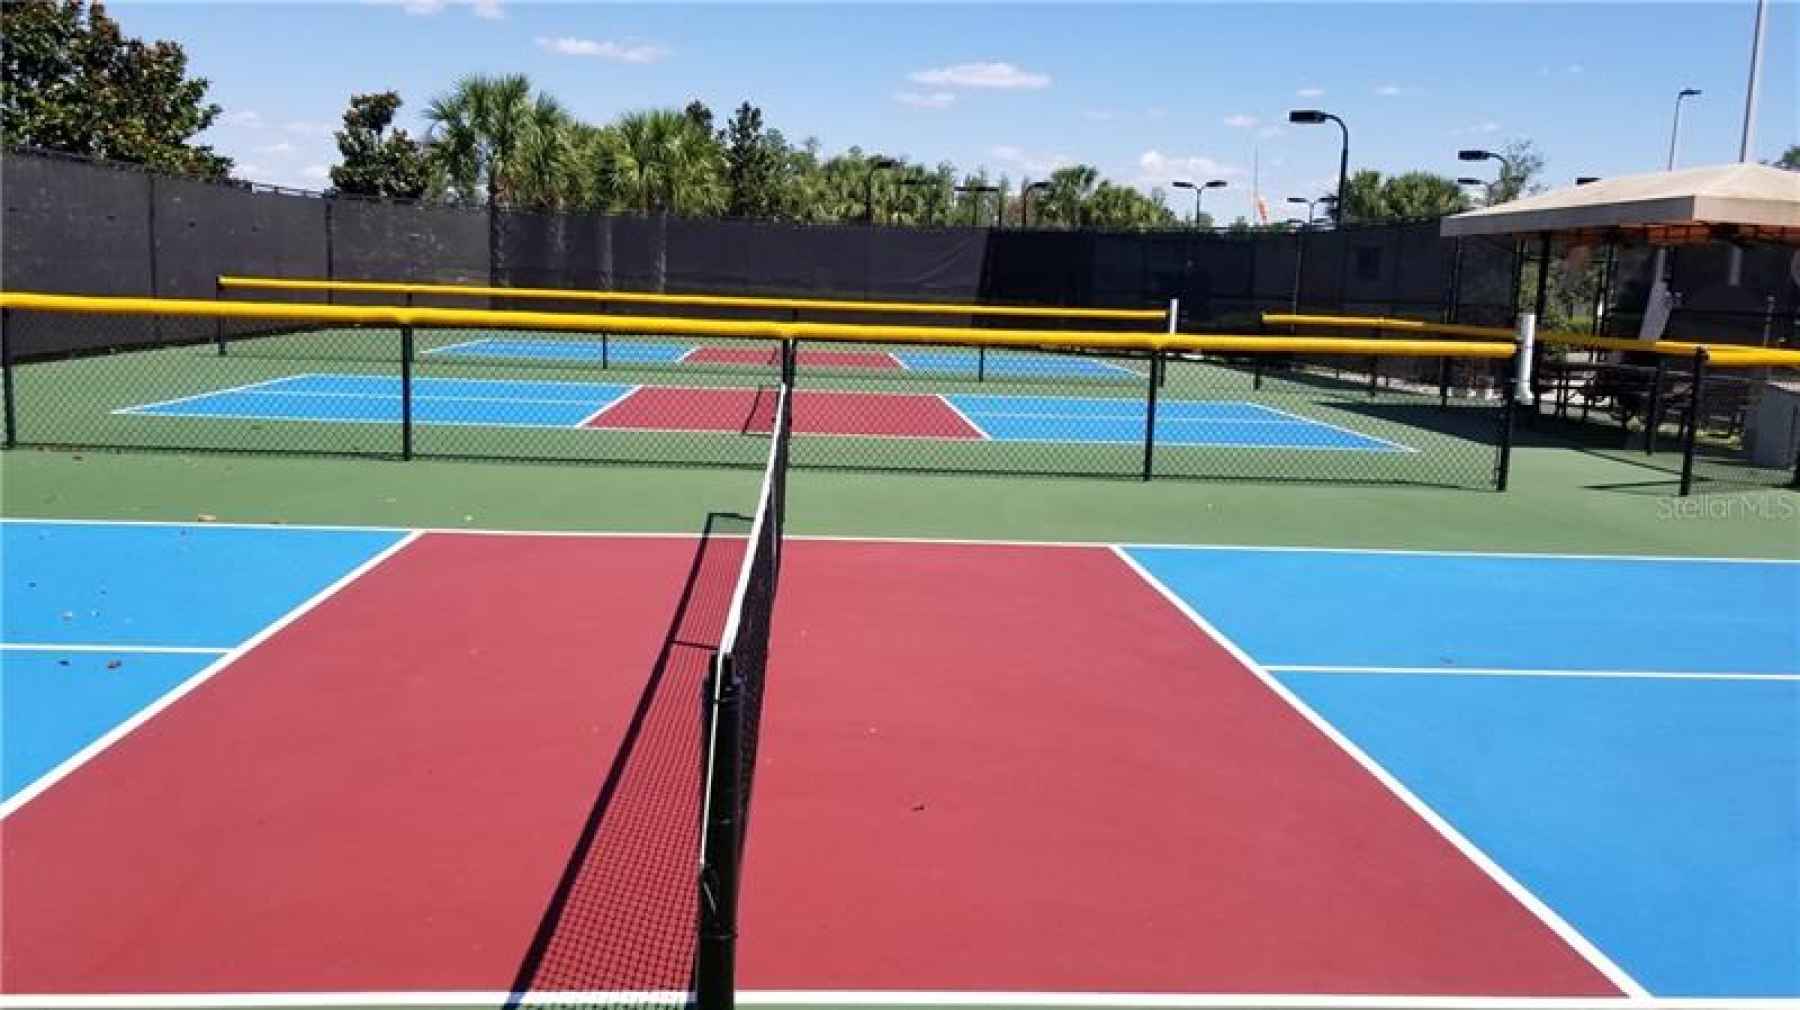 7 newly re-surfaced pickelball courts.